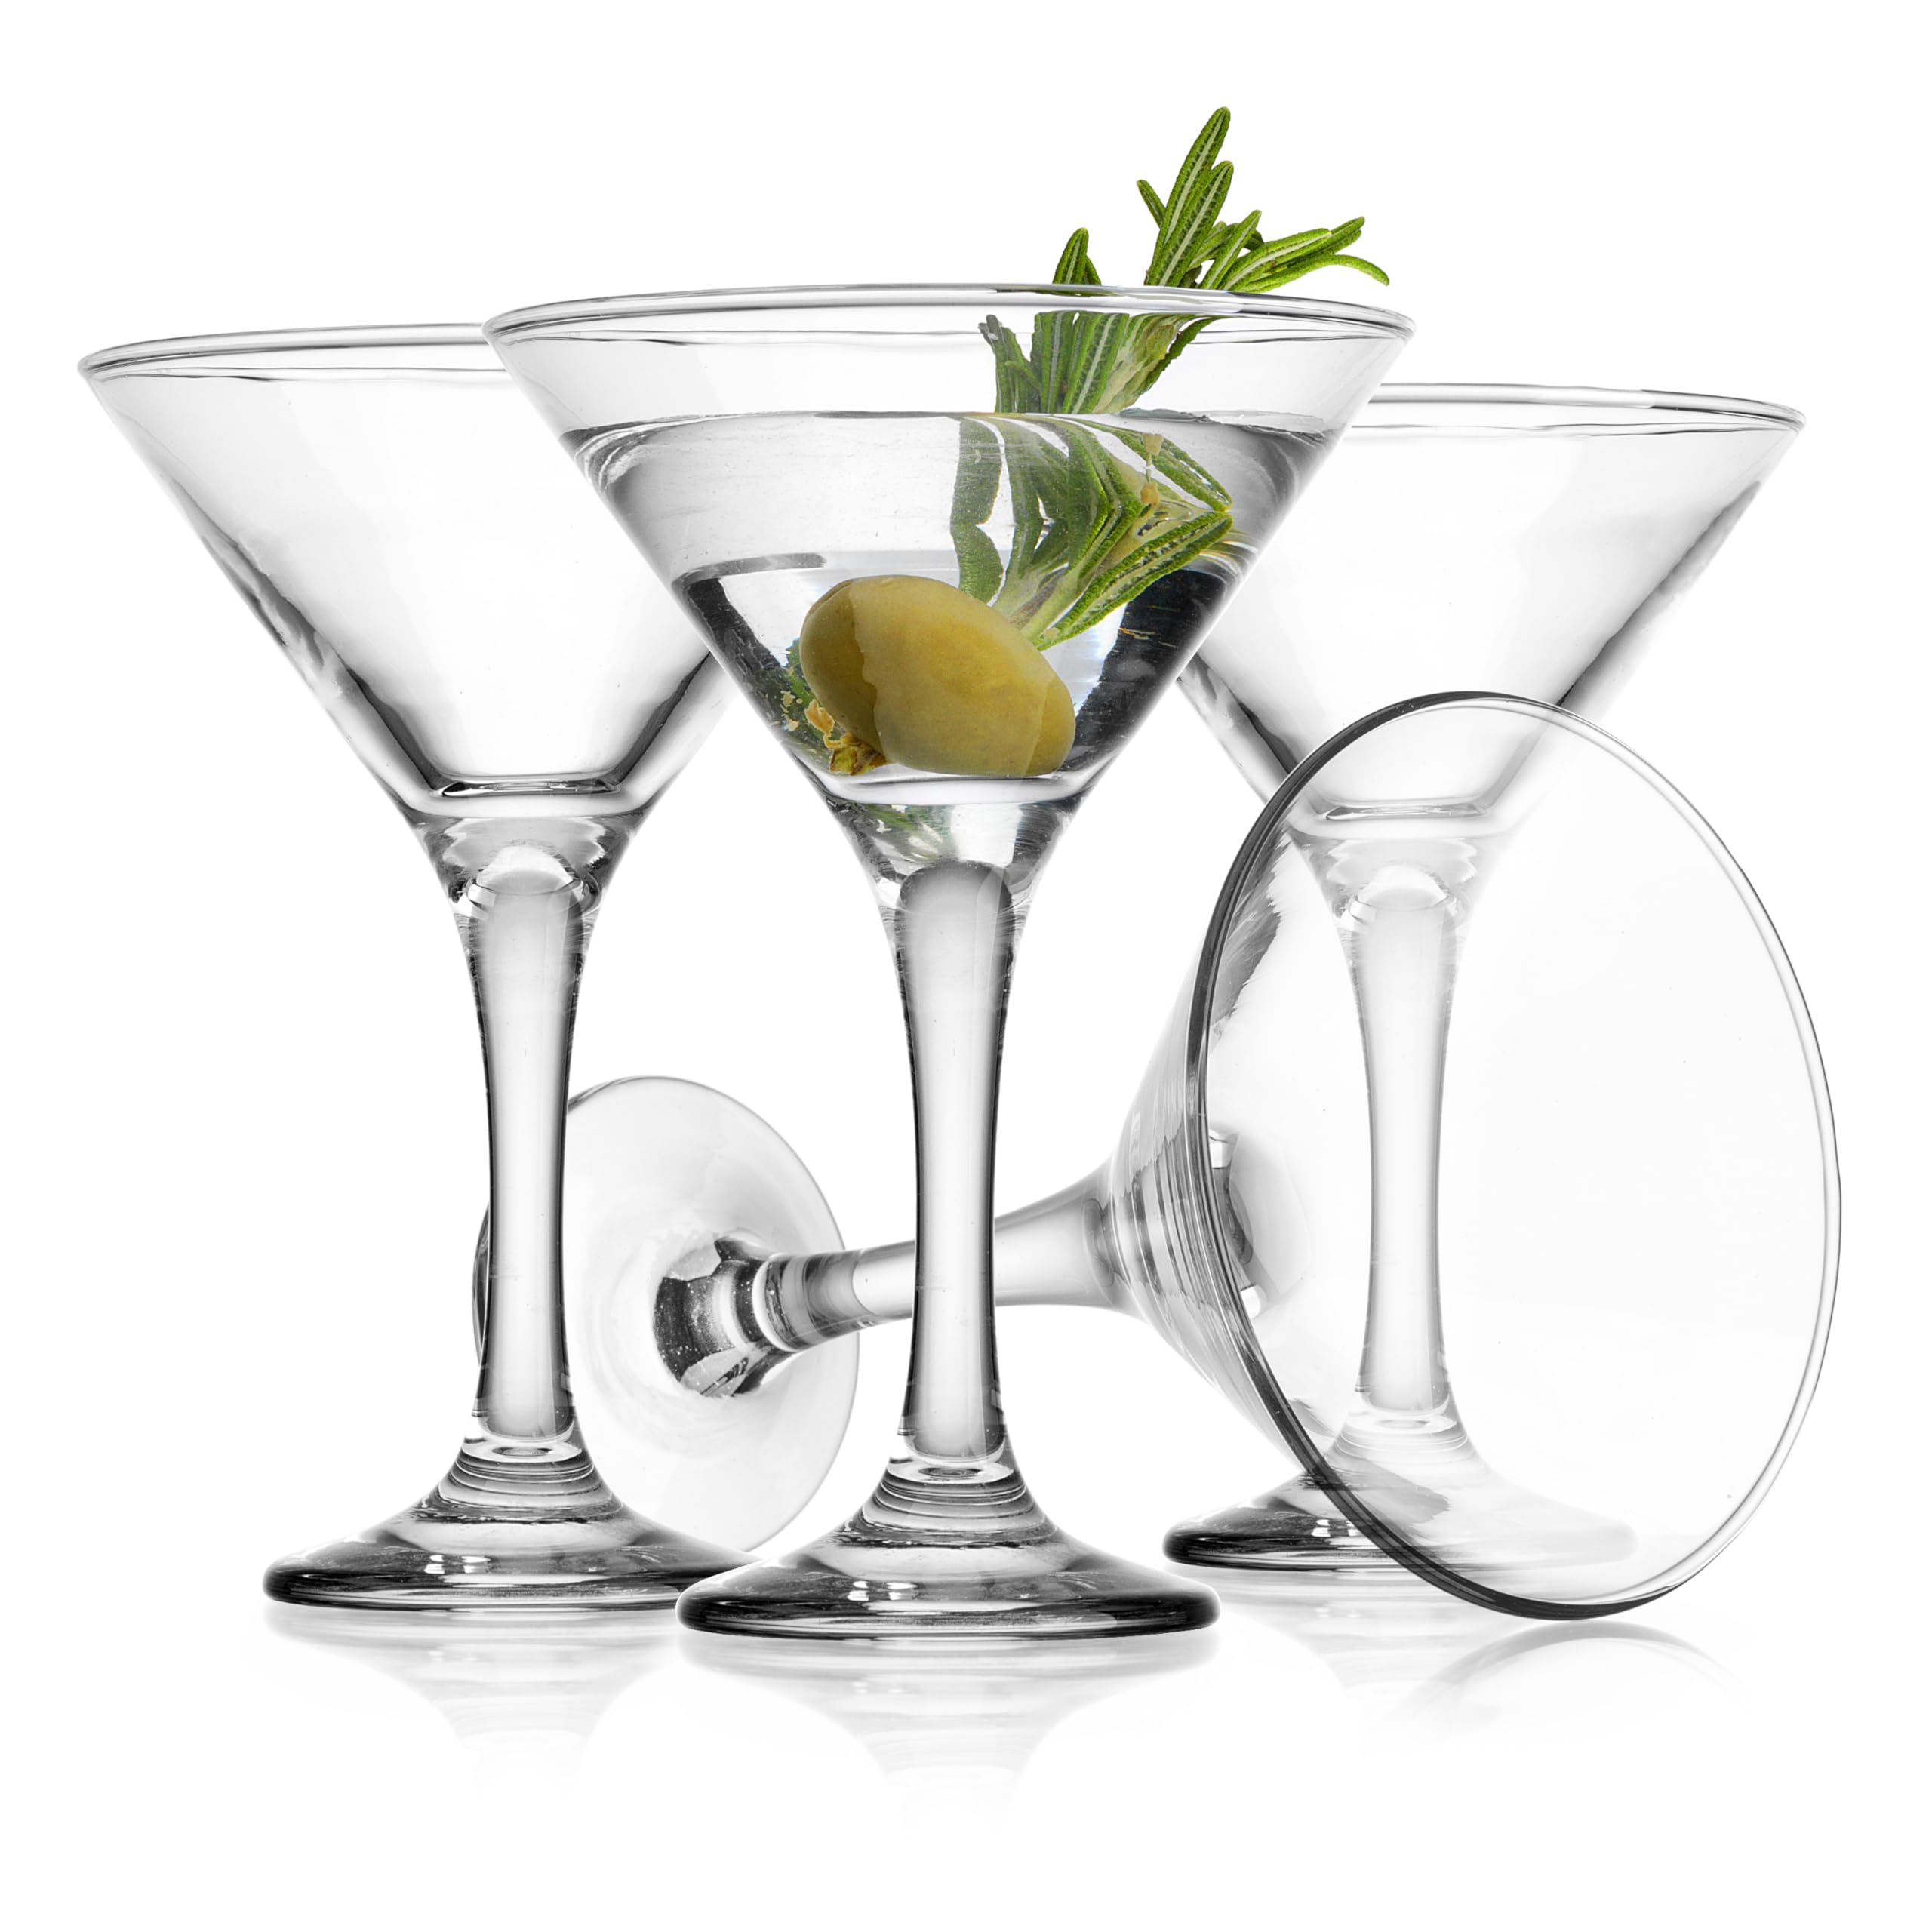 Glaver's Martini Glasses Set of 4 Cocktail Glasses, 6 Ounce Premium Strong Lead-Free Glass, Stemmed Margarita Glasses, For Bar, Martini, And More Dishwasher Safe  - Like New